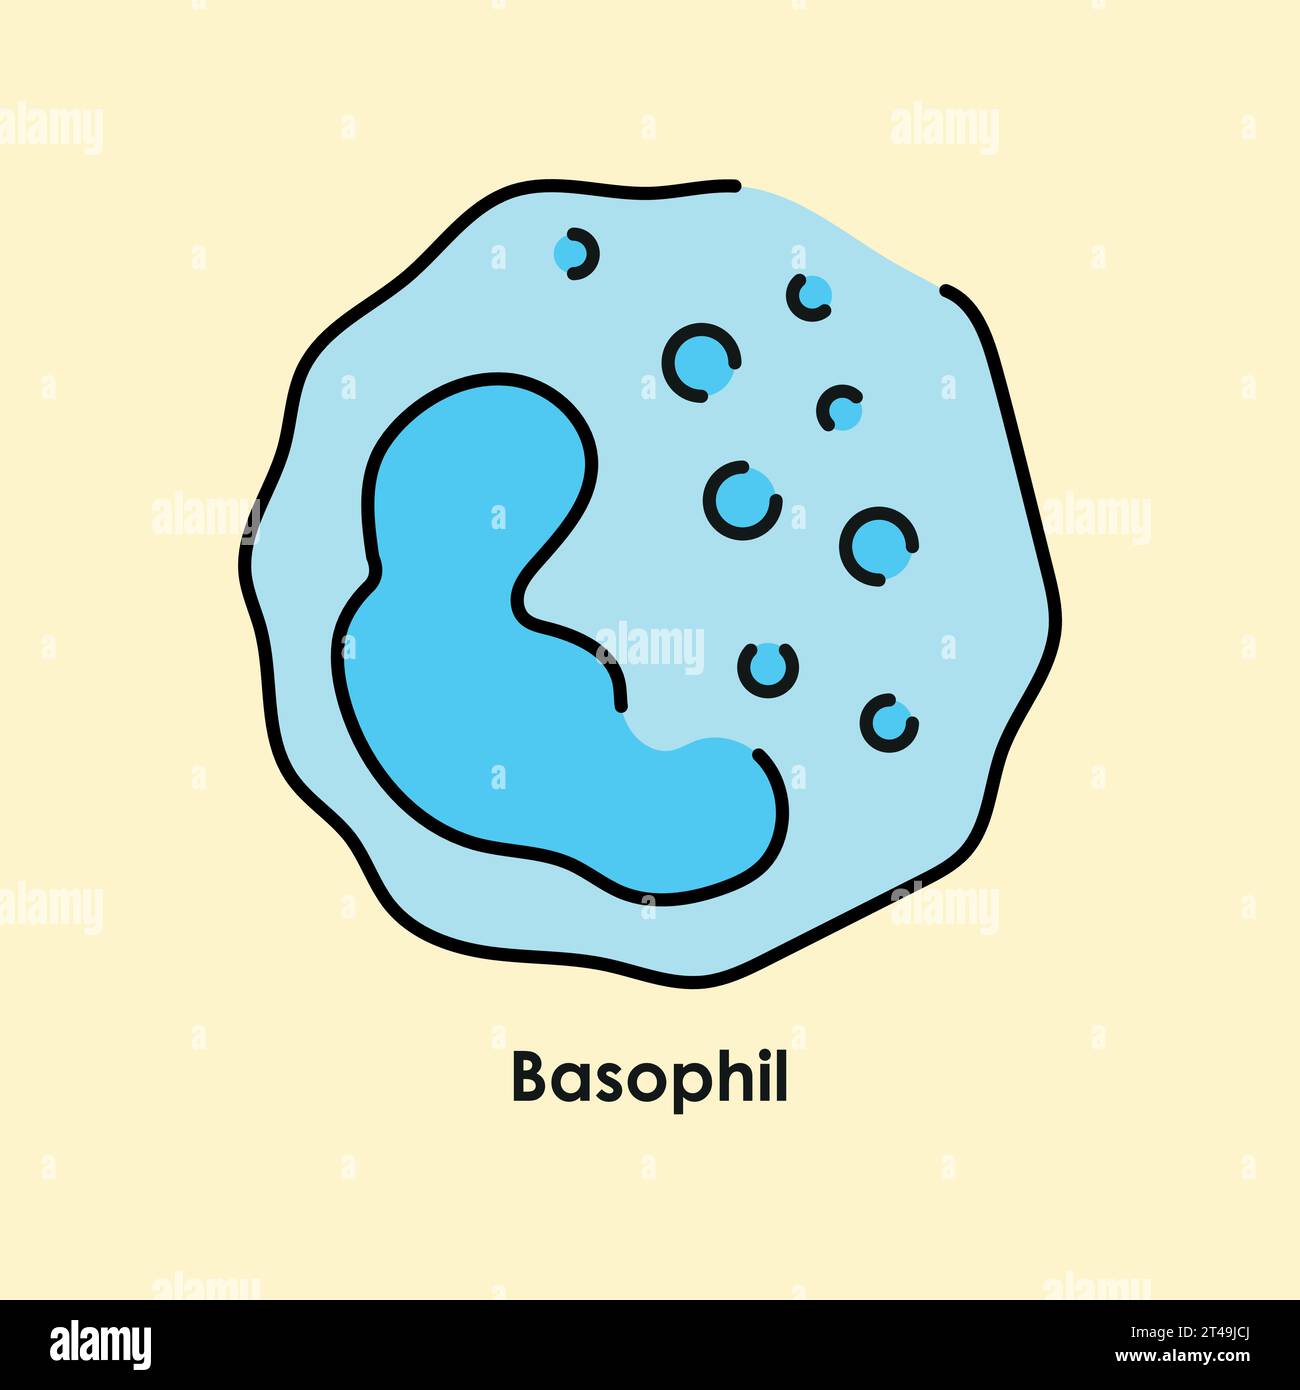 Basophil color icon. White blood cells in the blood vessels. Vector isolated illustration. Stock Vector